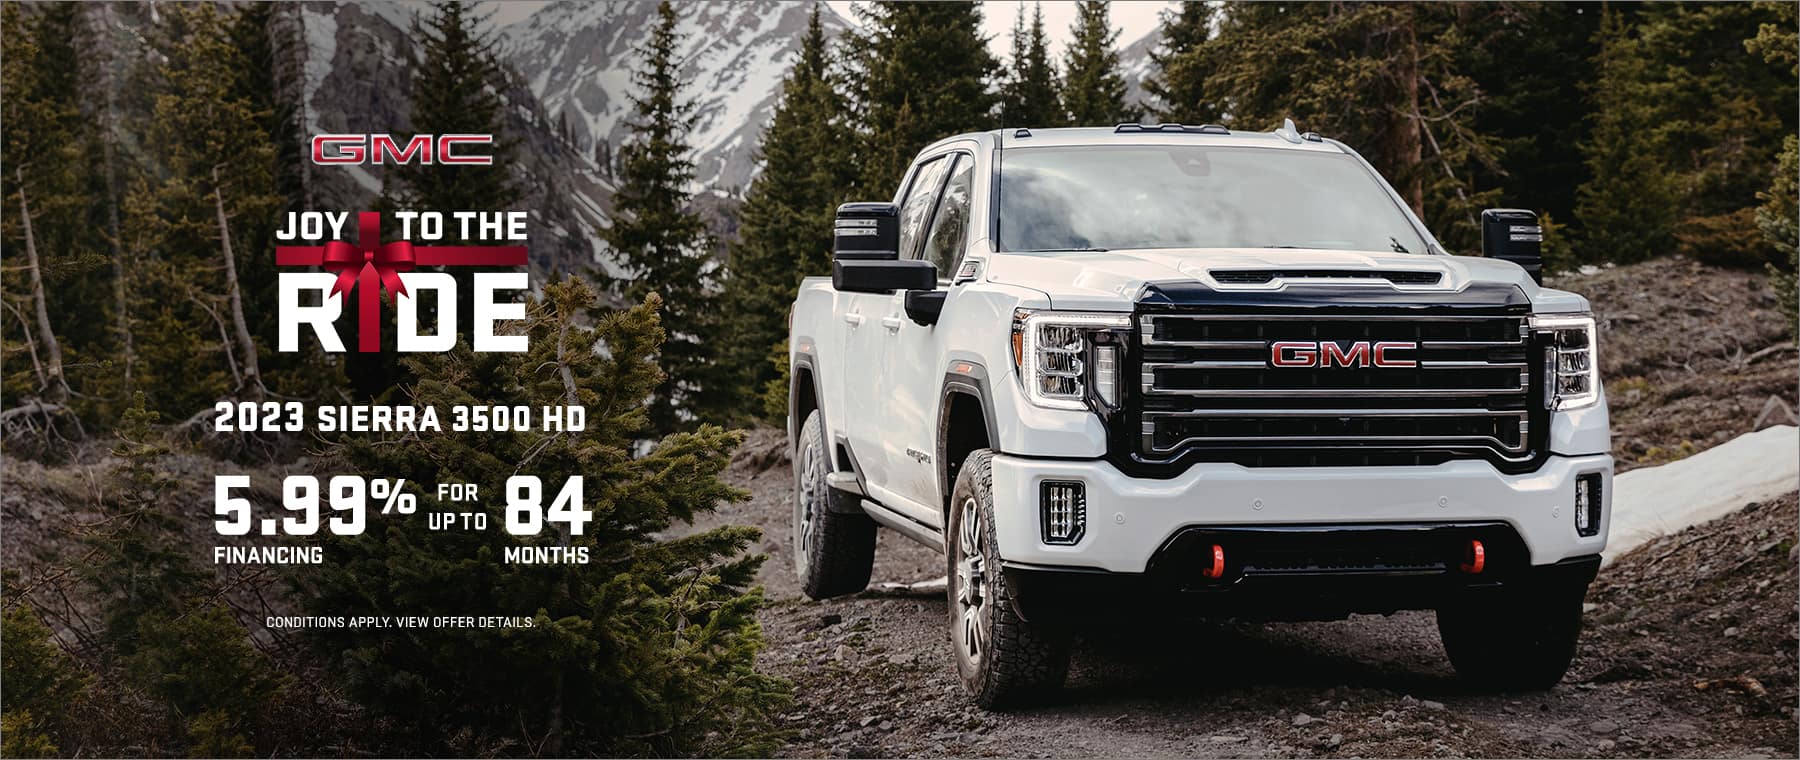 Get 5.99% financing for up to 84 months on a new 2023 GMC Sierra 3500 HD